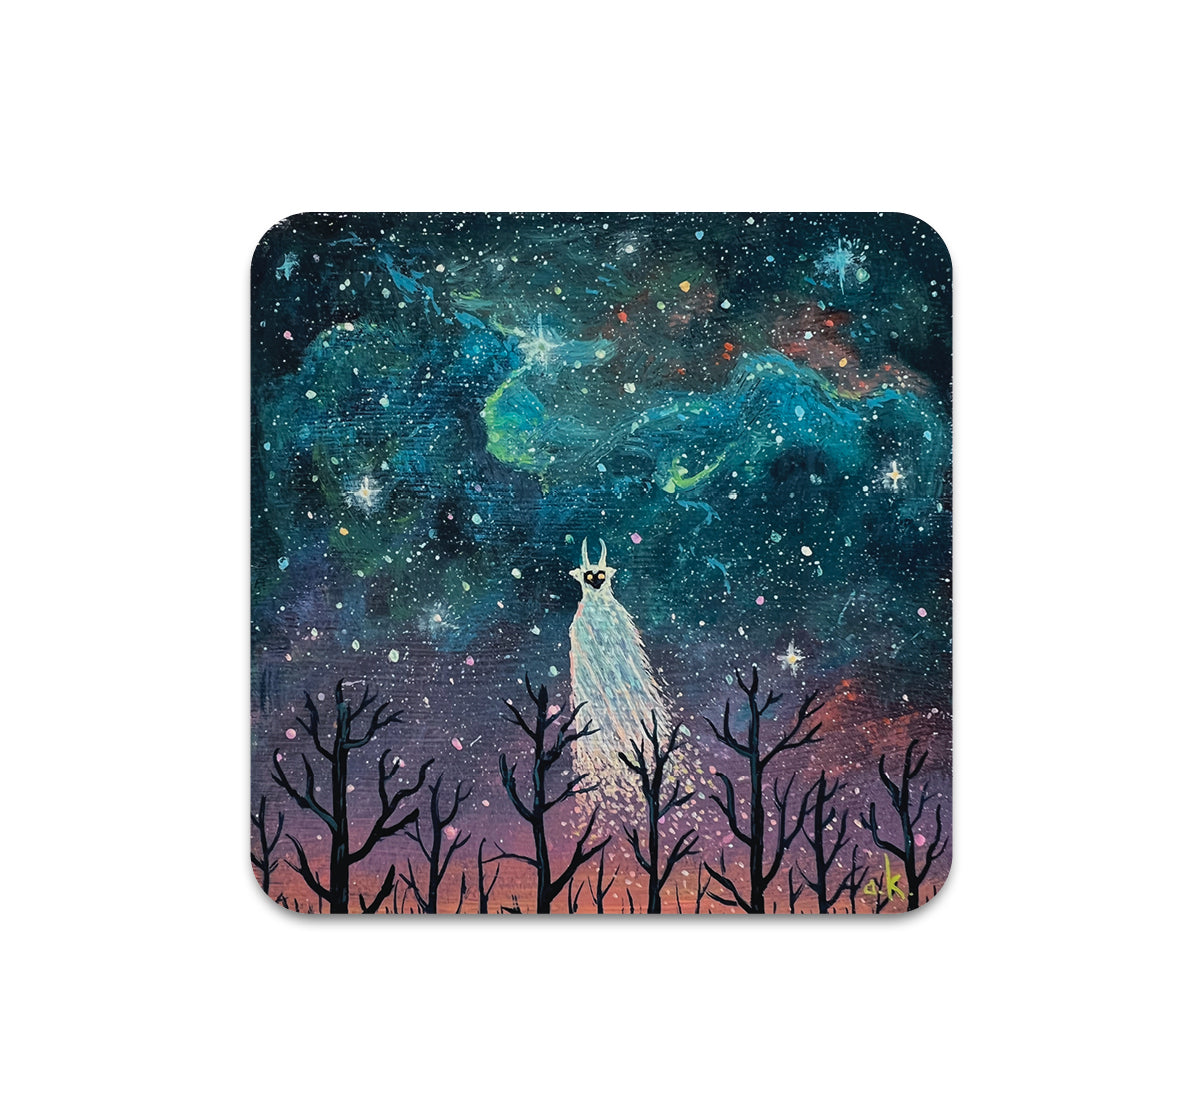 S8 Andy Kehoe - Coaster 1